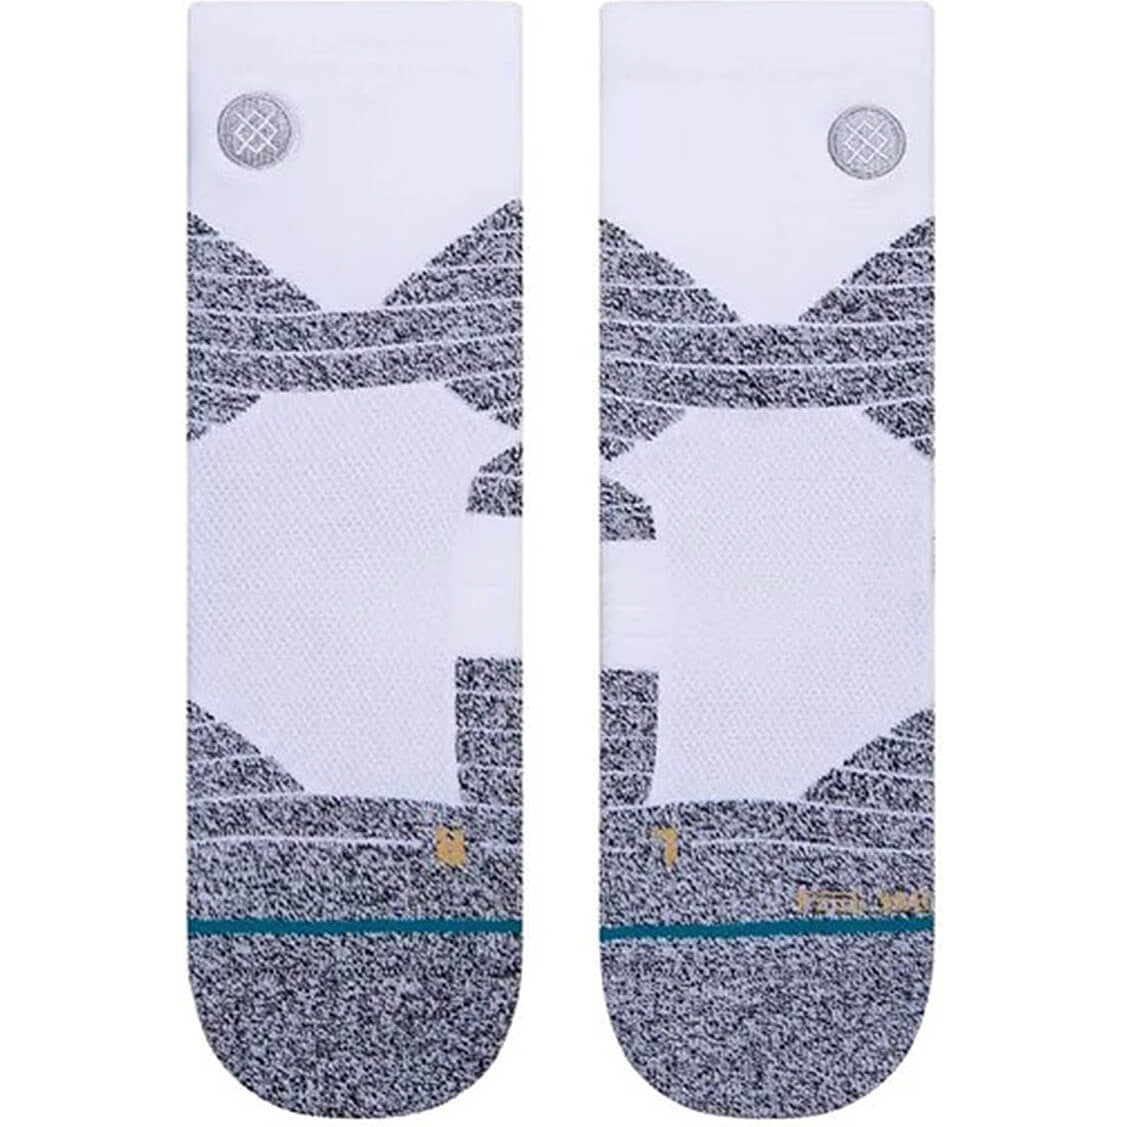 STANCE ICON SPORT QTR / WHITE